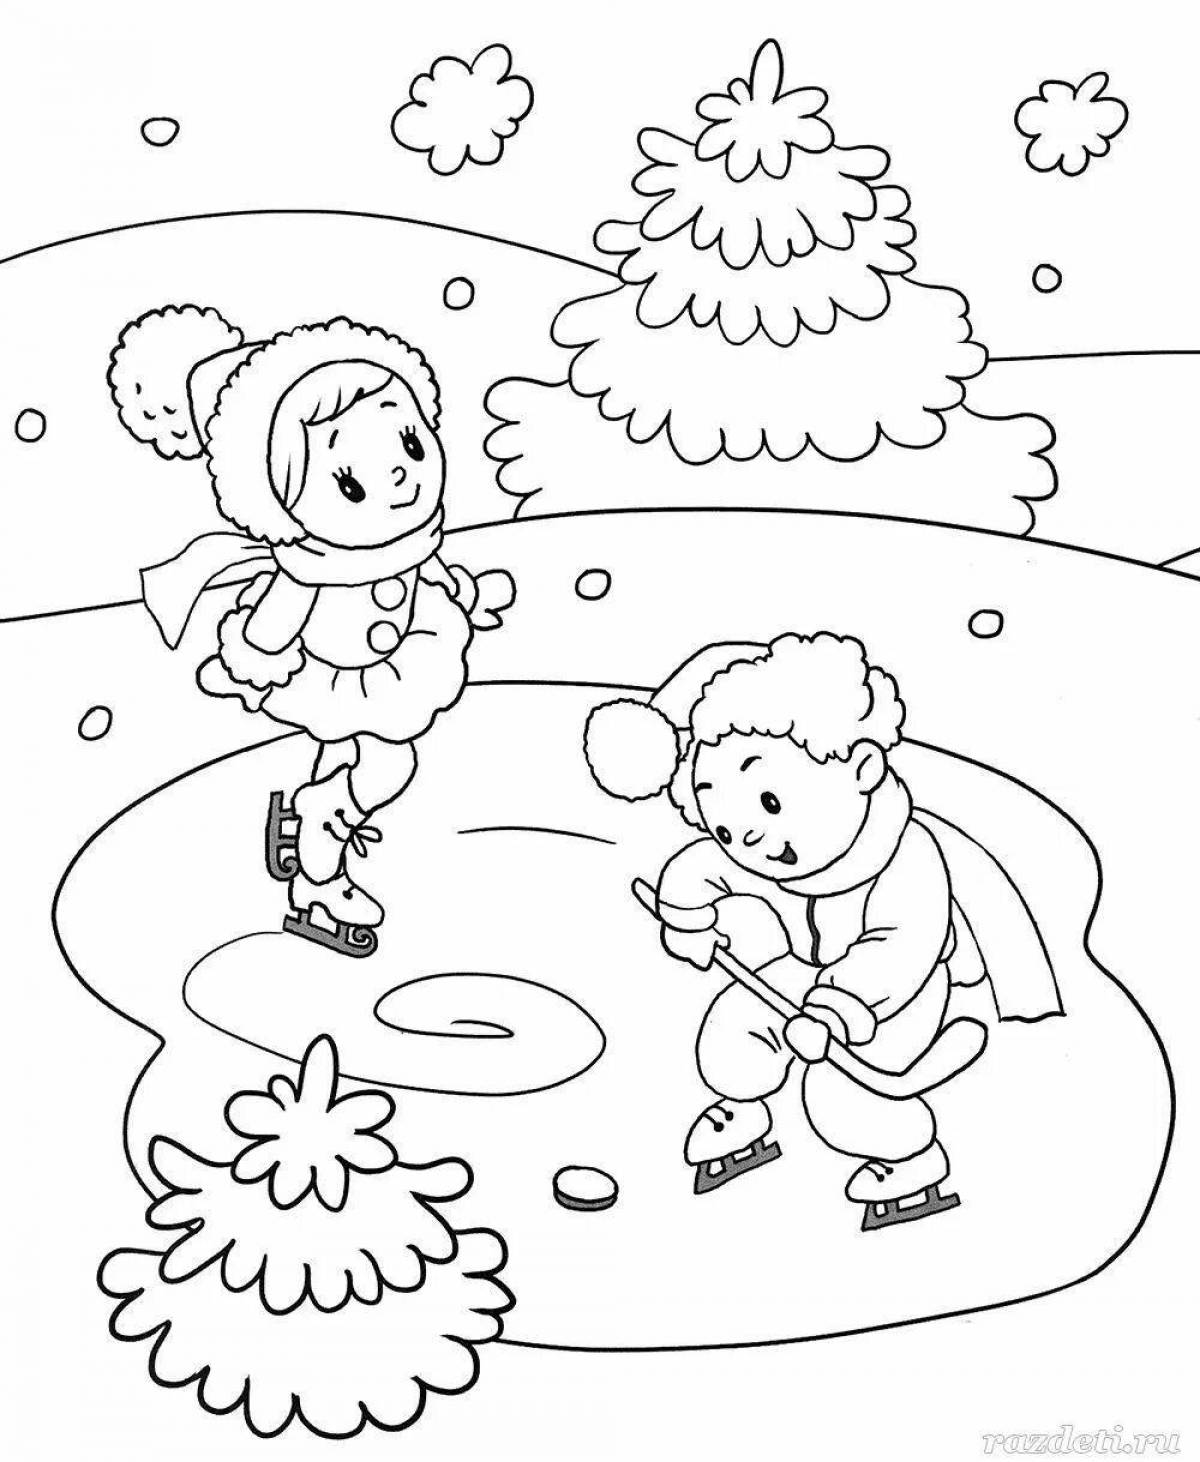 Exciting winter fun junior group coloring book